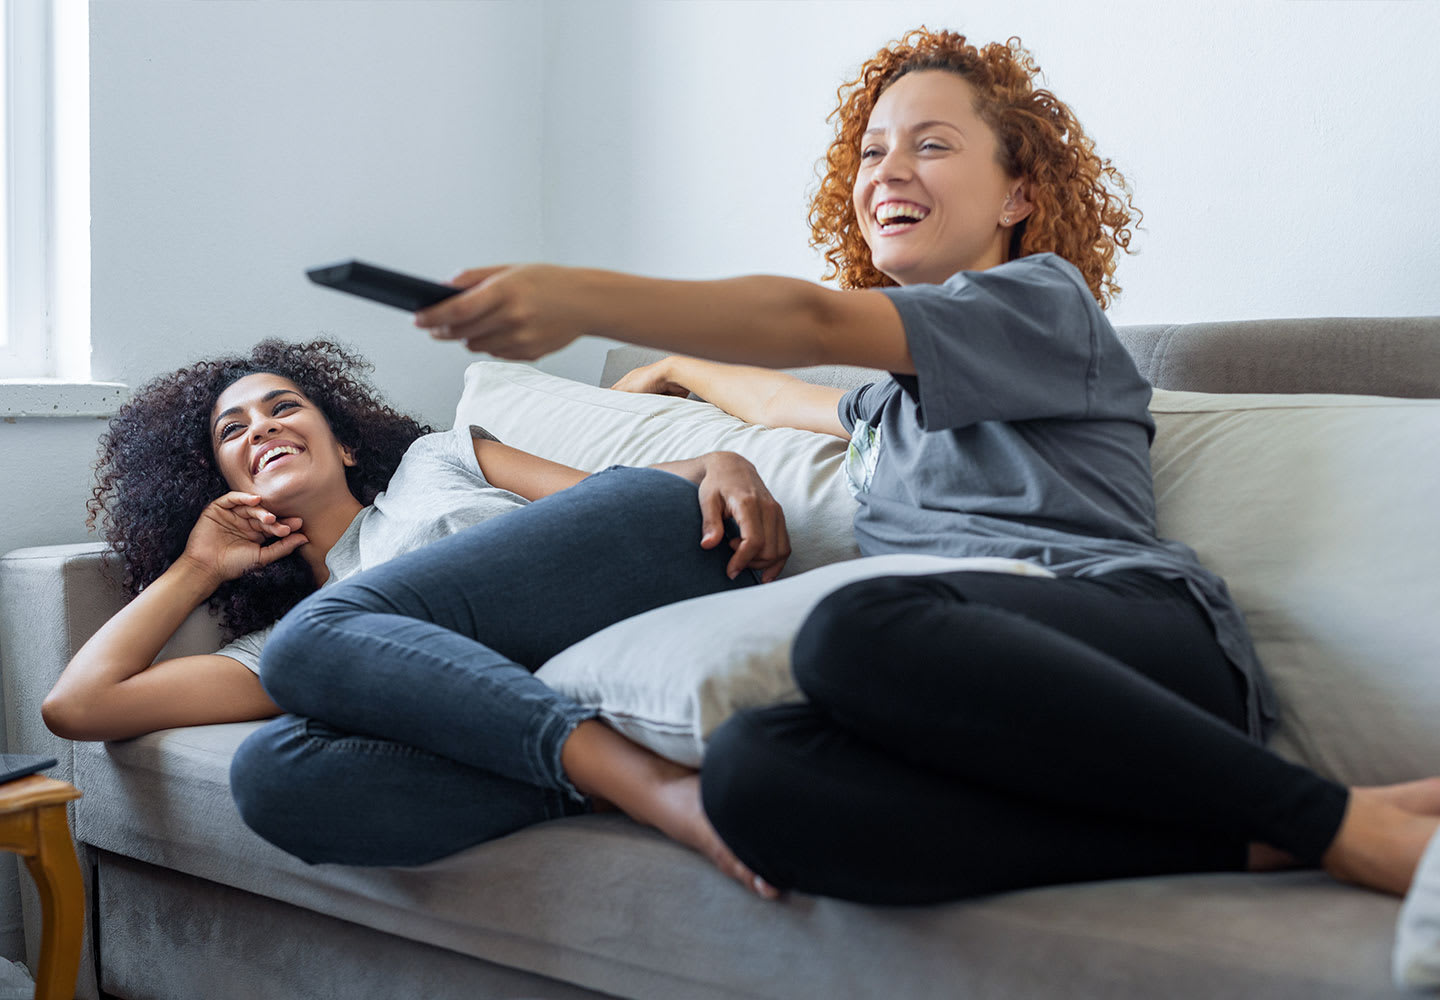 Two teen girls laying on a sofa watching TV